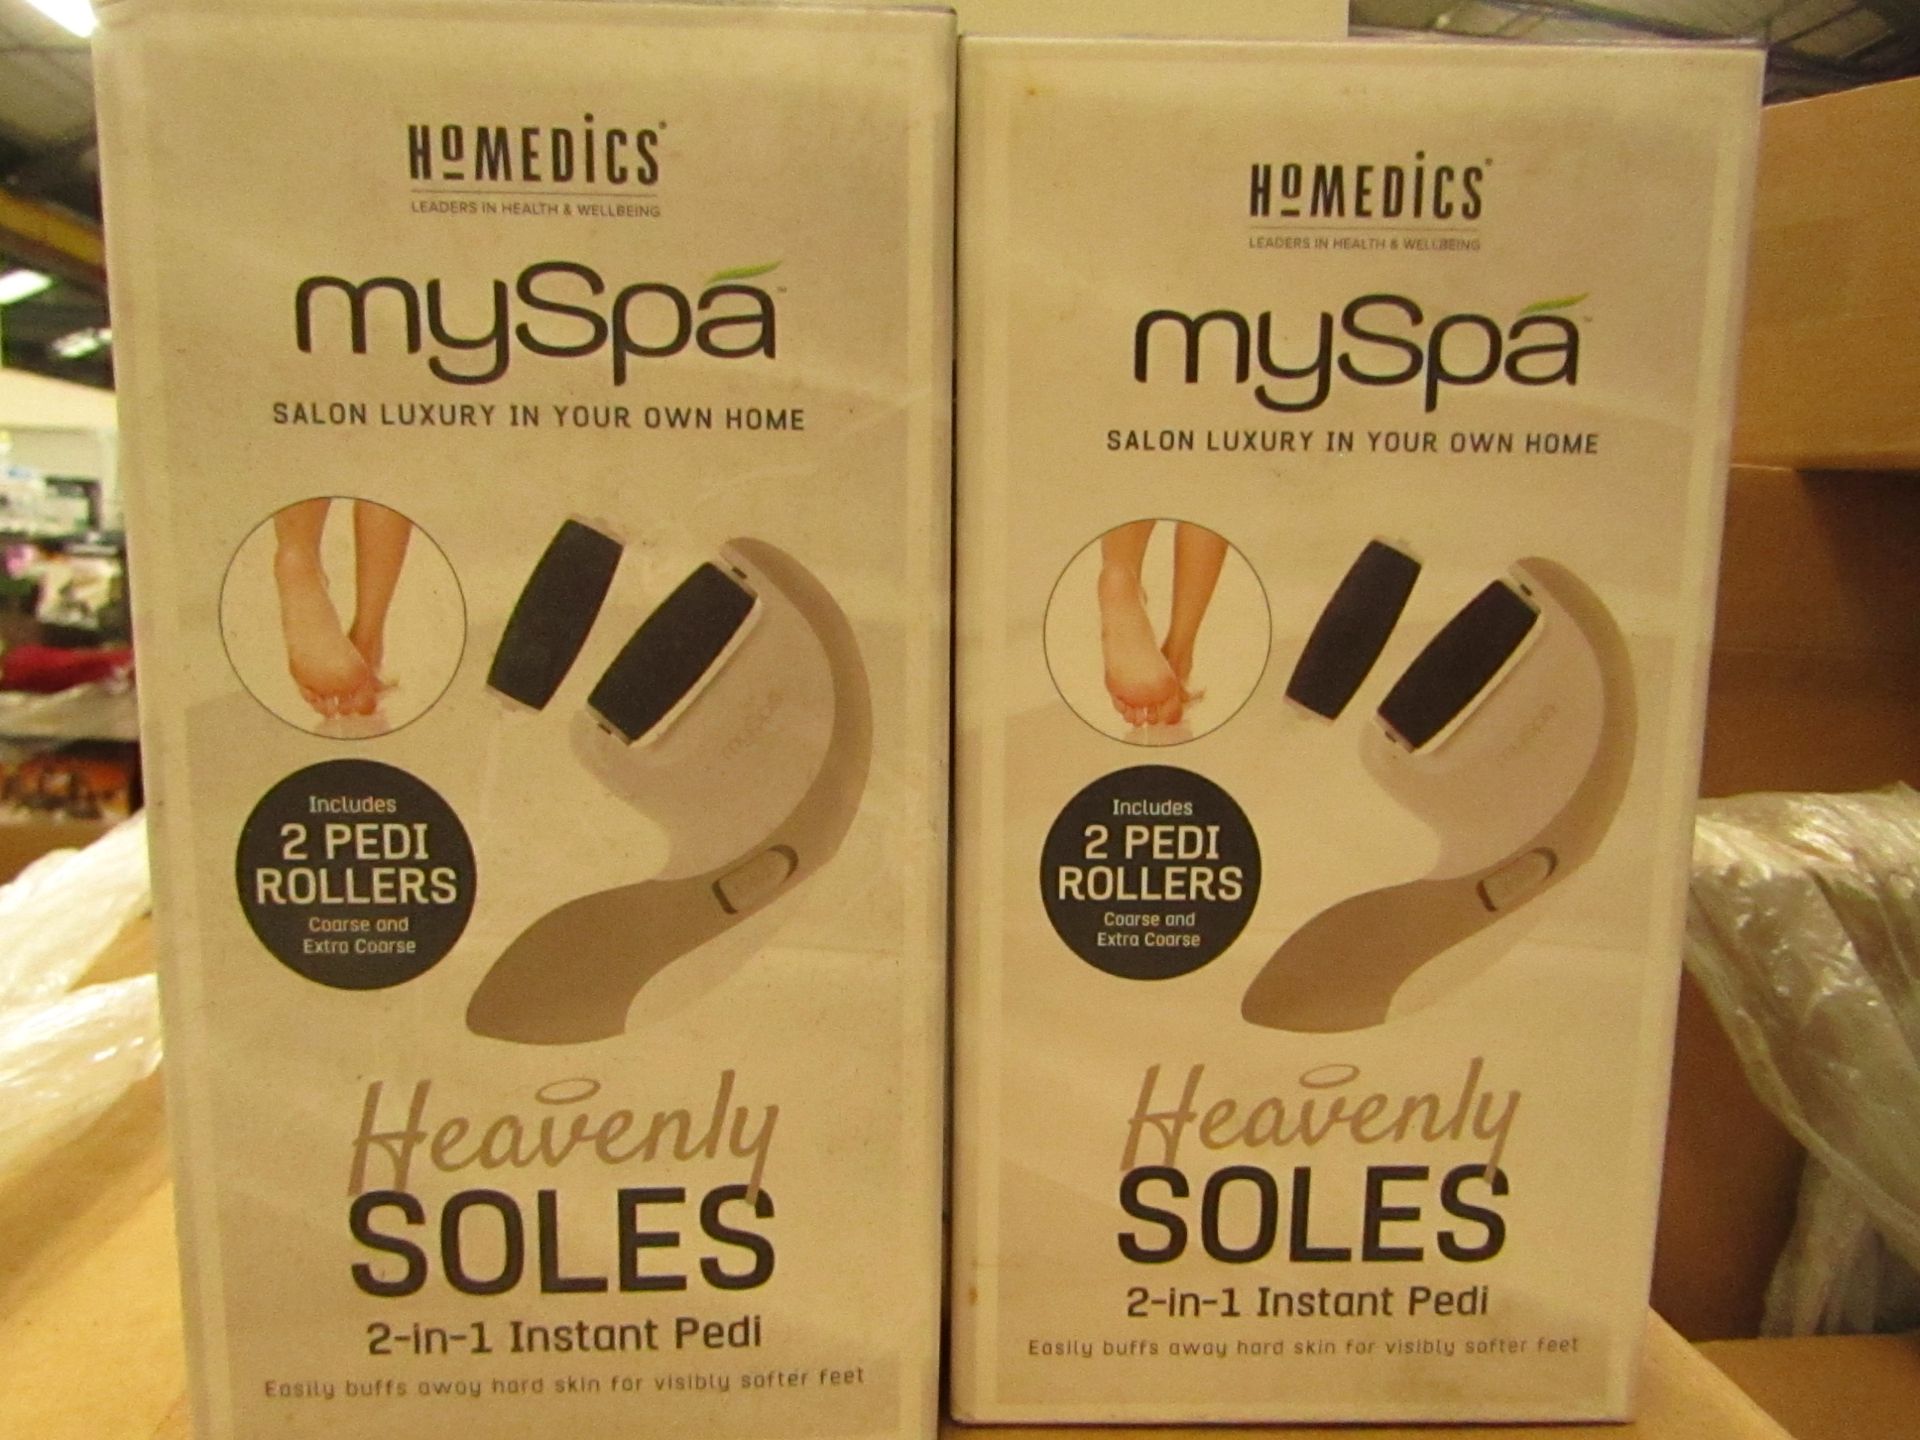 2x Homedics Heavenly soles 2 in 1 instant pedi, look unused and boxed